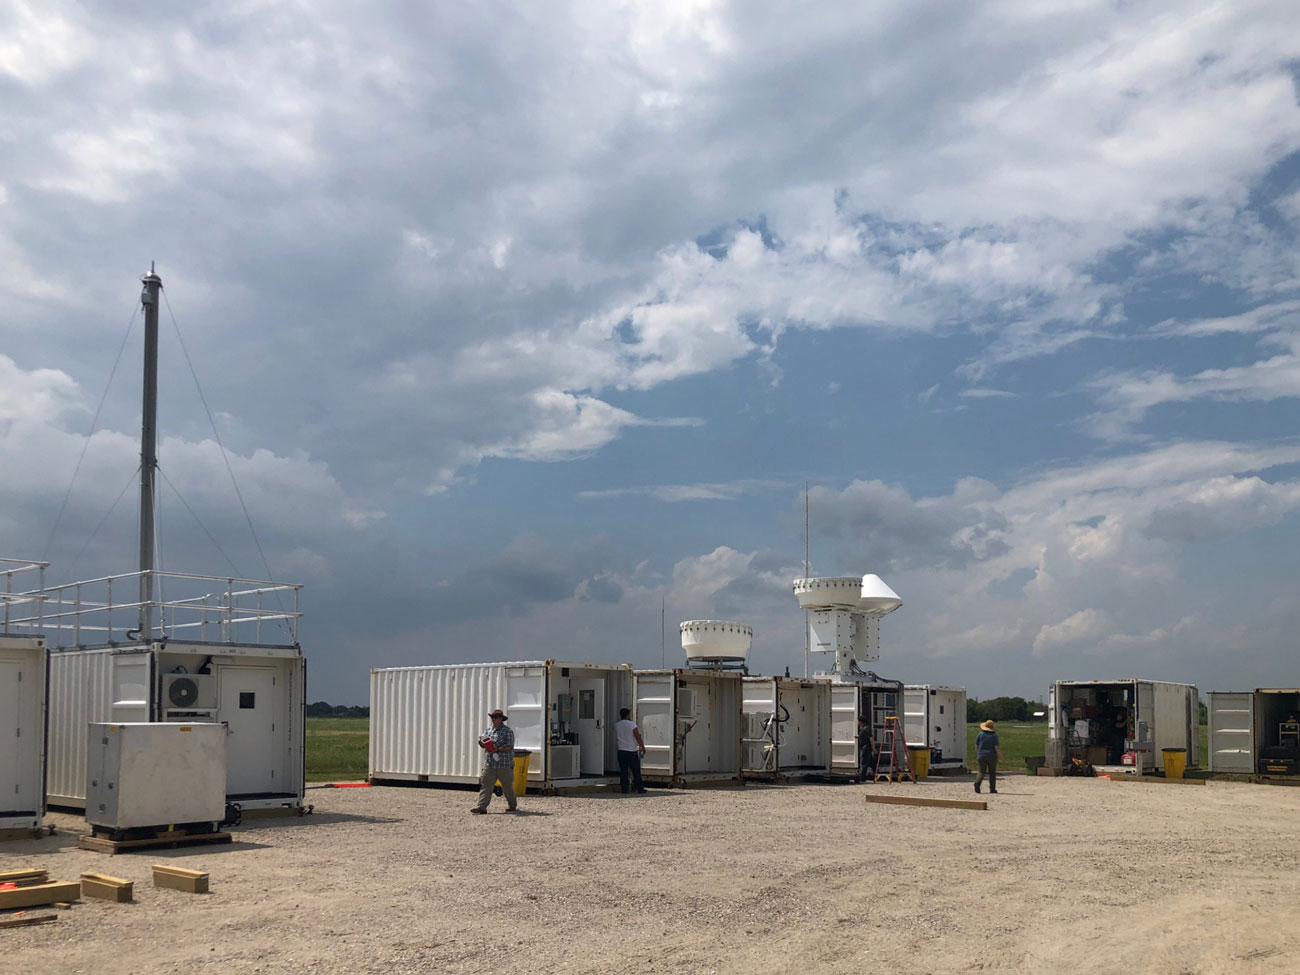 Setup of the ARM Mobile Facility in La Porte, Texas, ahead of the TRACER campaign